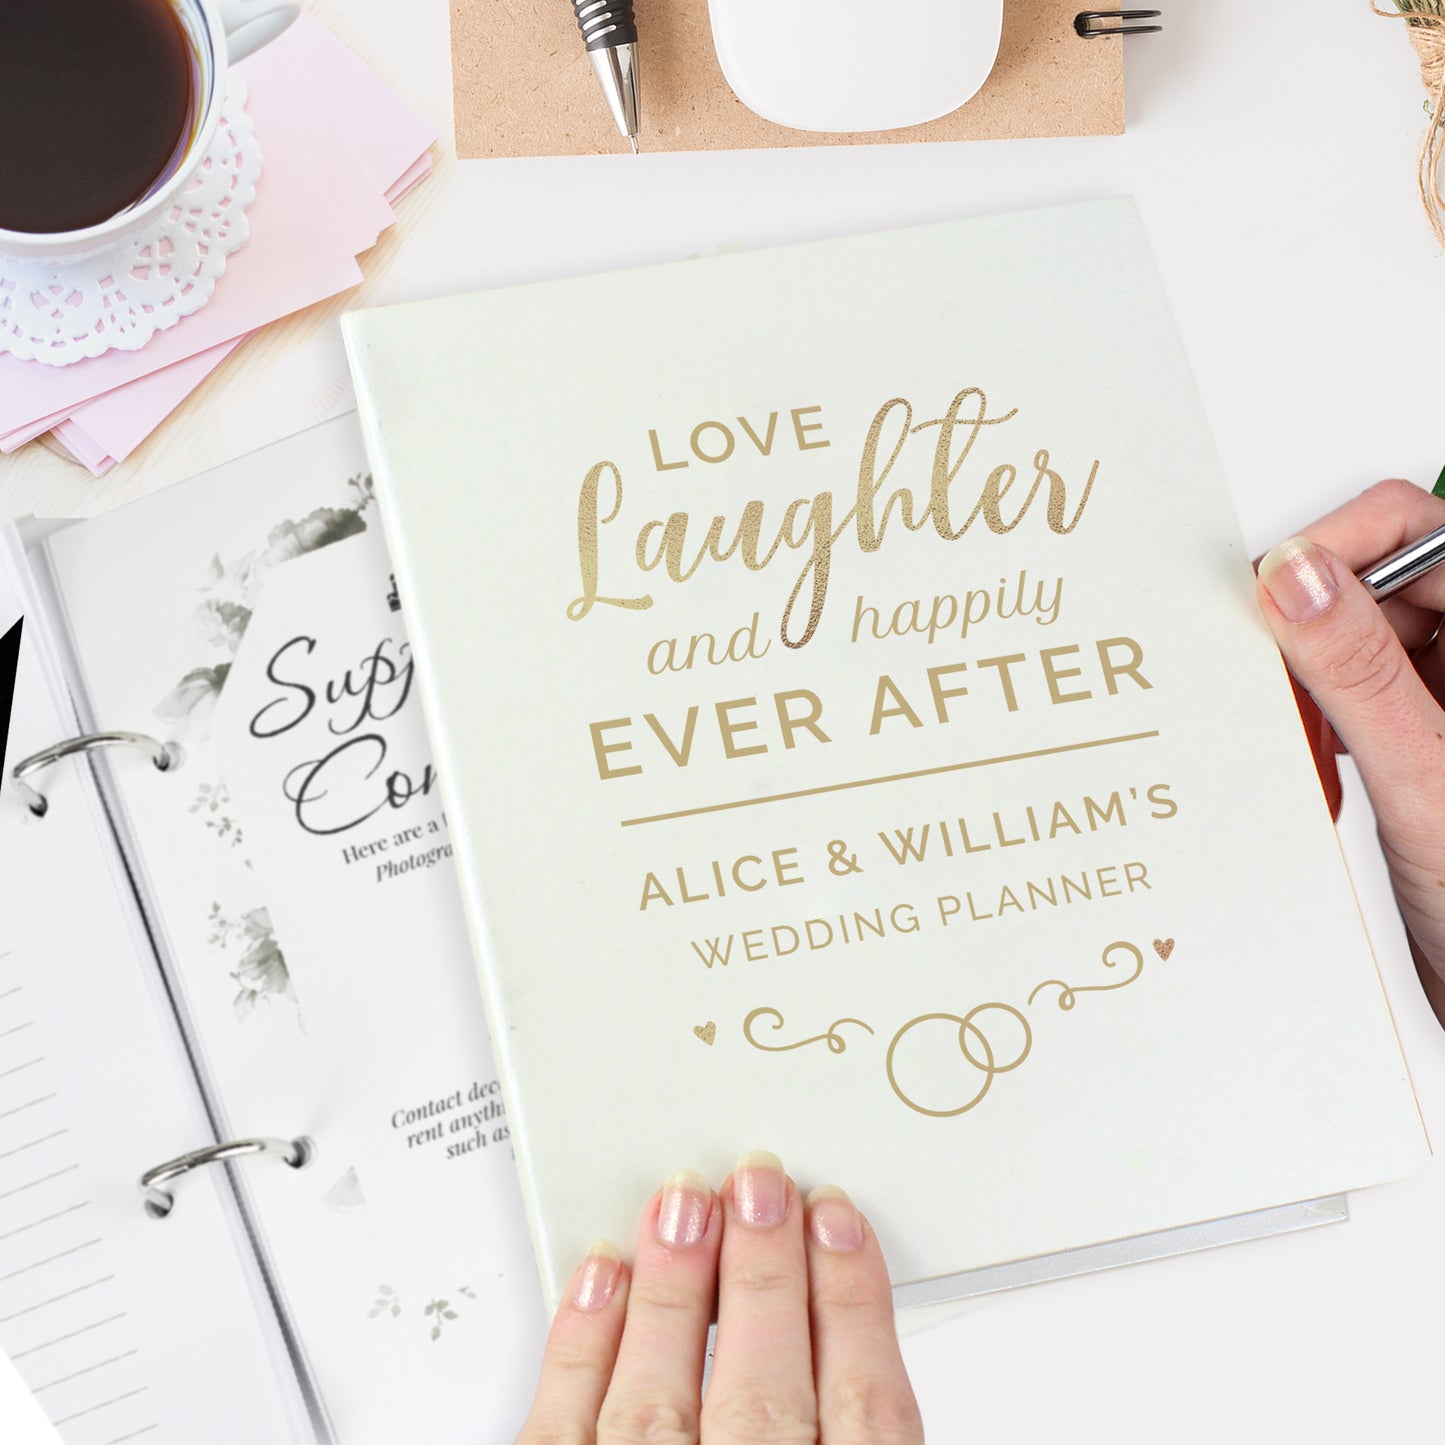 Personalised Happily Ever After Wedding Planner - Personalise It!